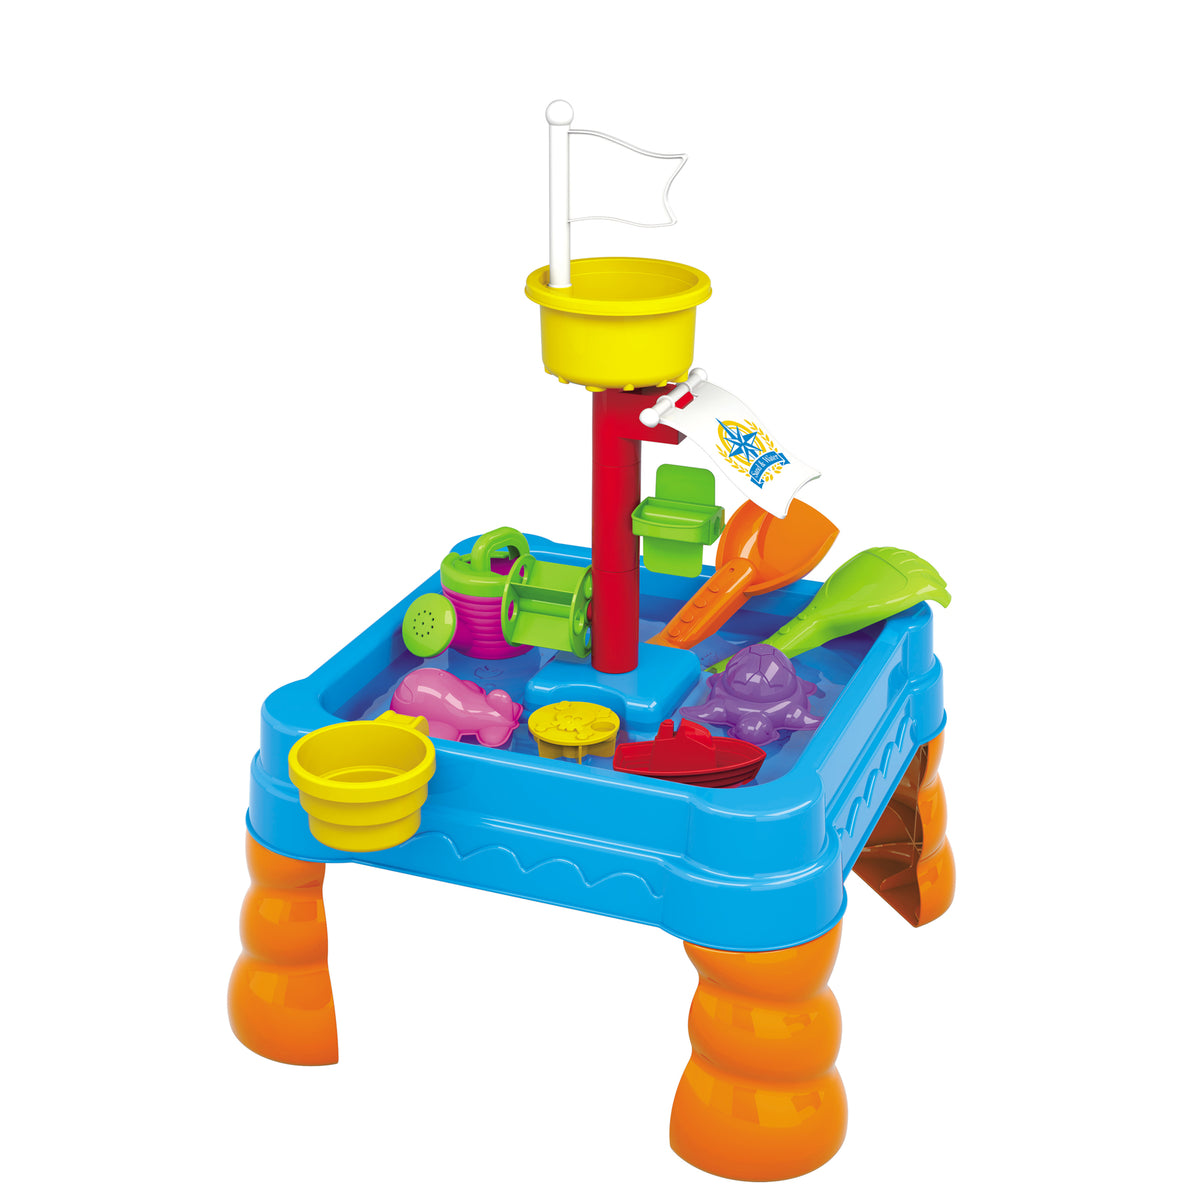 Children's Sand & Water Table with 21 Play Accessories.